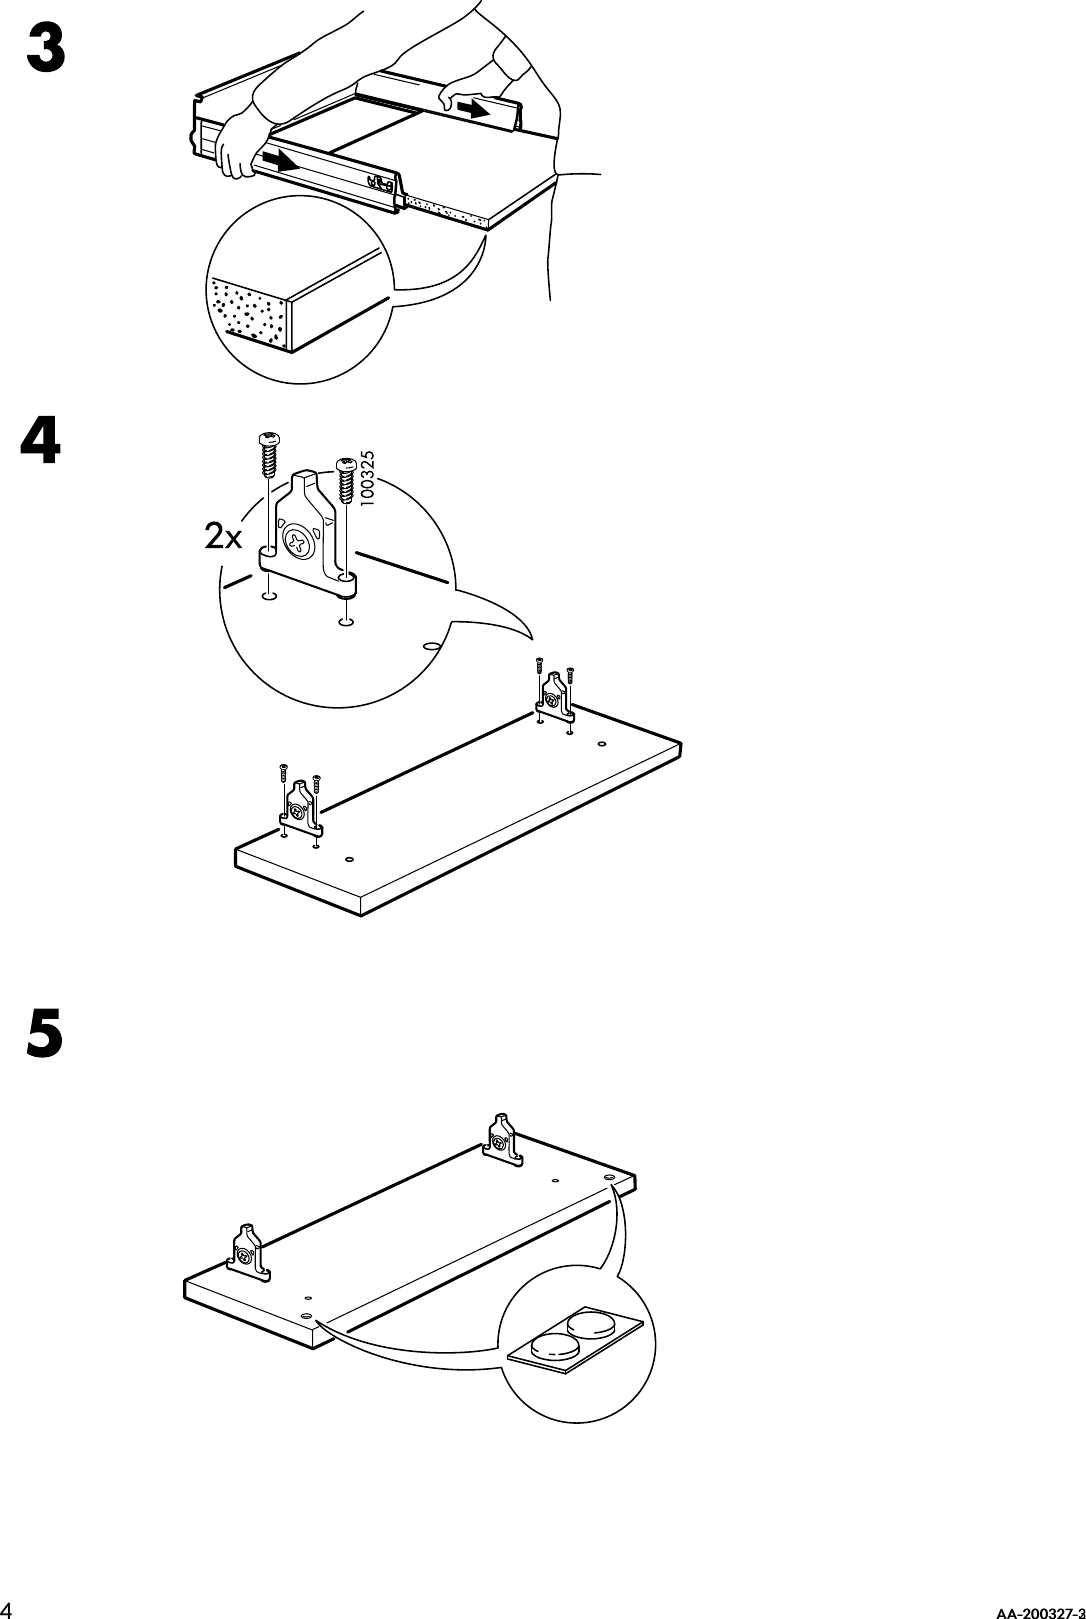 Page 4 of 8 - Ikea Ikea-Rationell-Deep-Full-Extending-Drawer-15-Assembly-Instruction